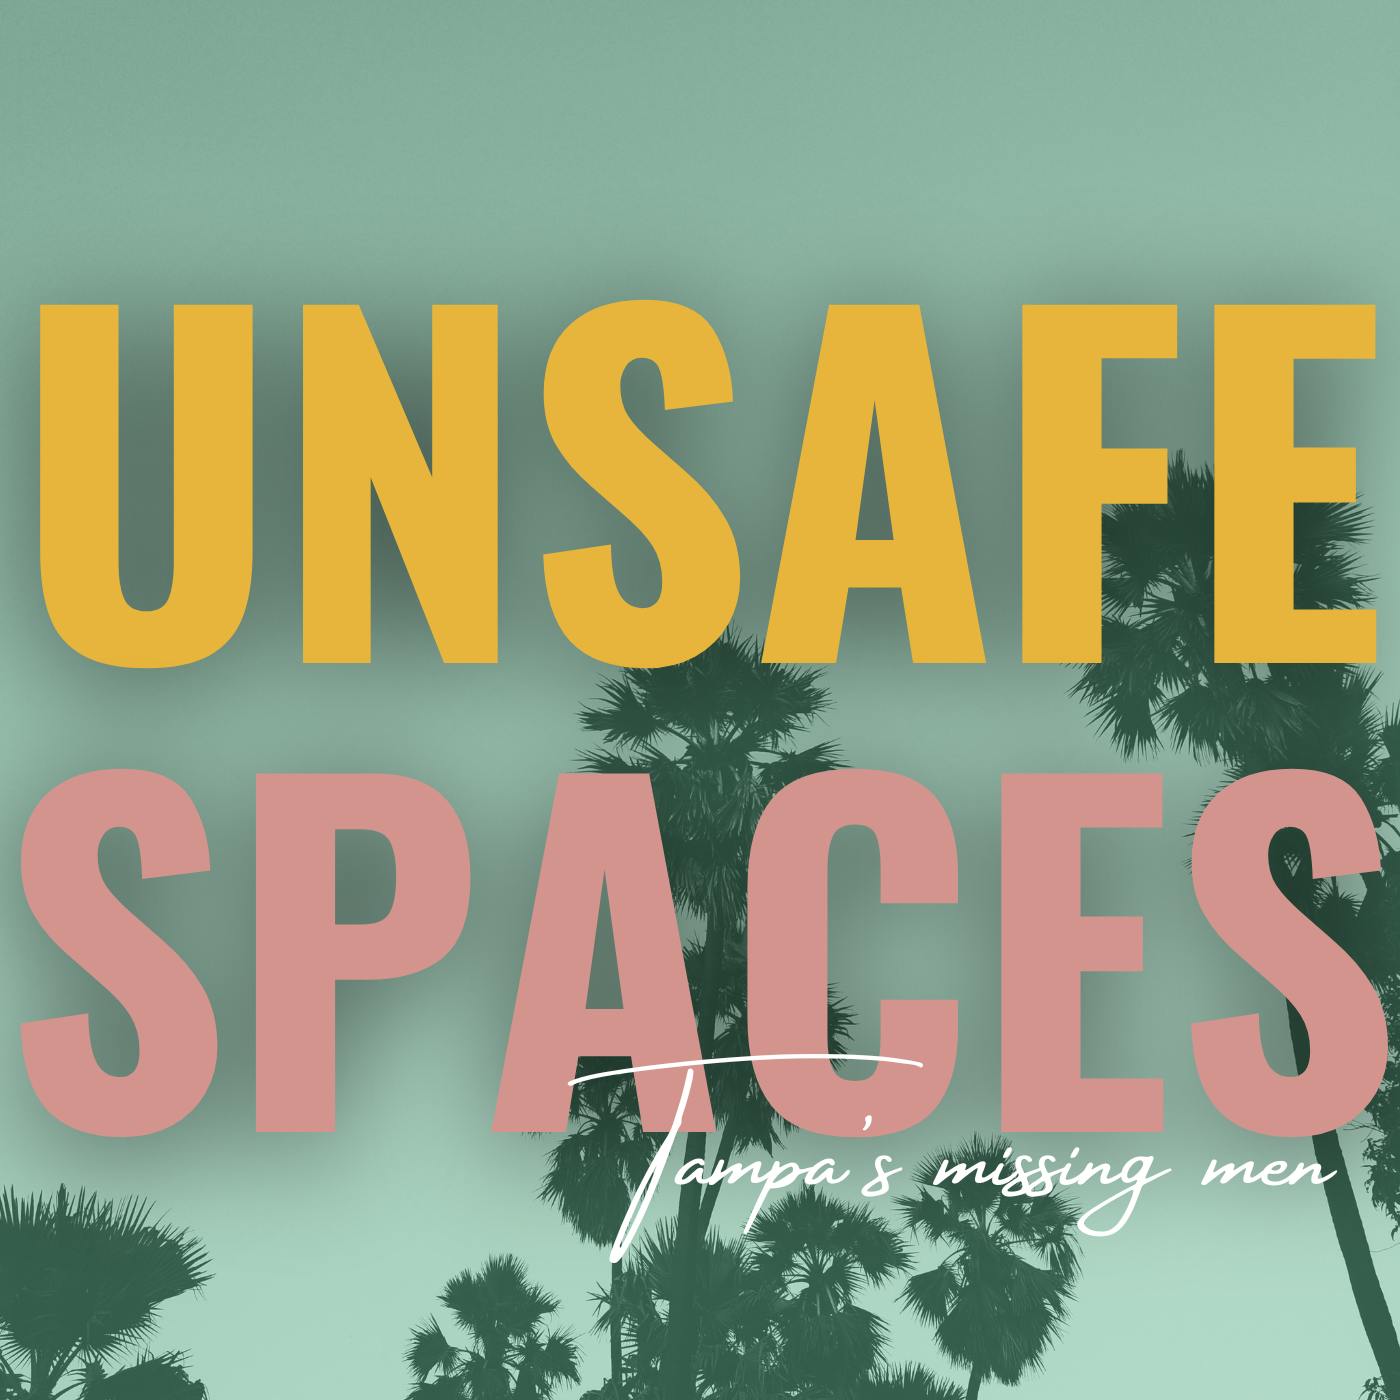 Introducing Unsafe Spaces: Tampa’s Missing Men